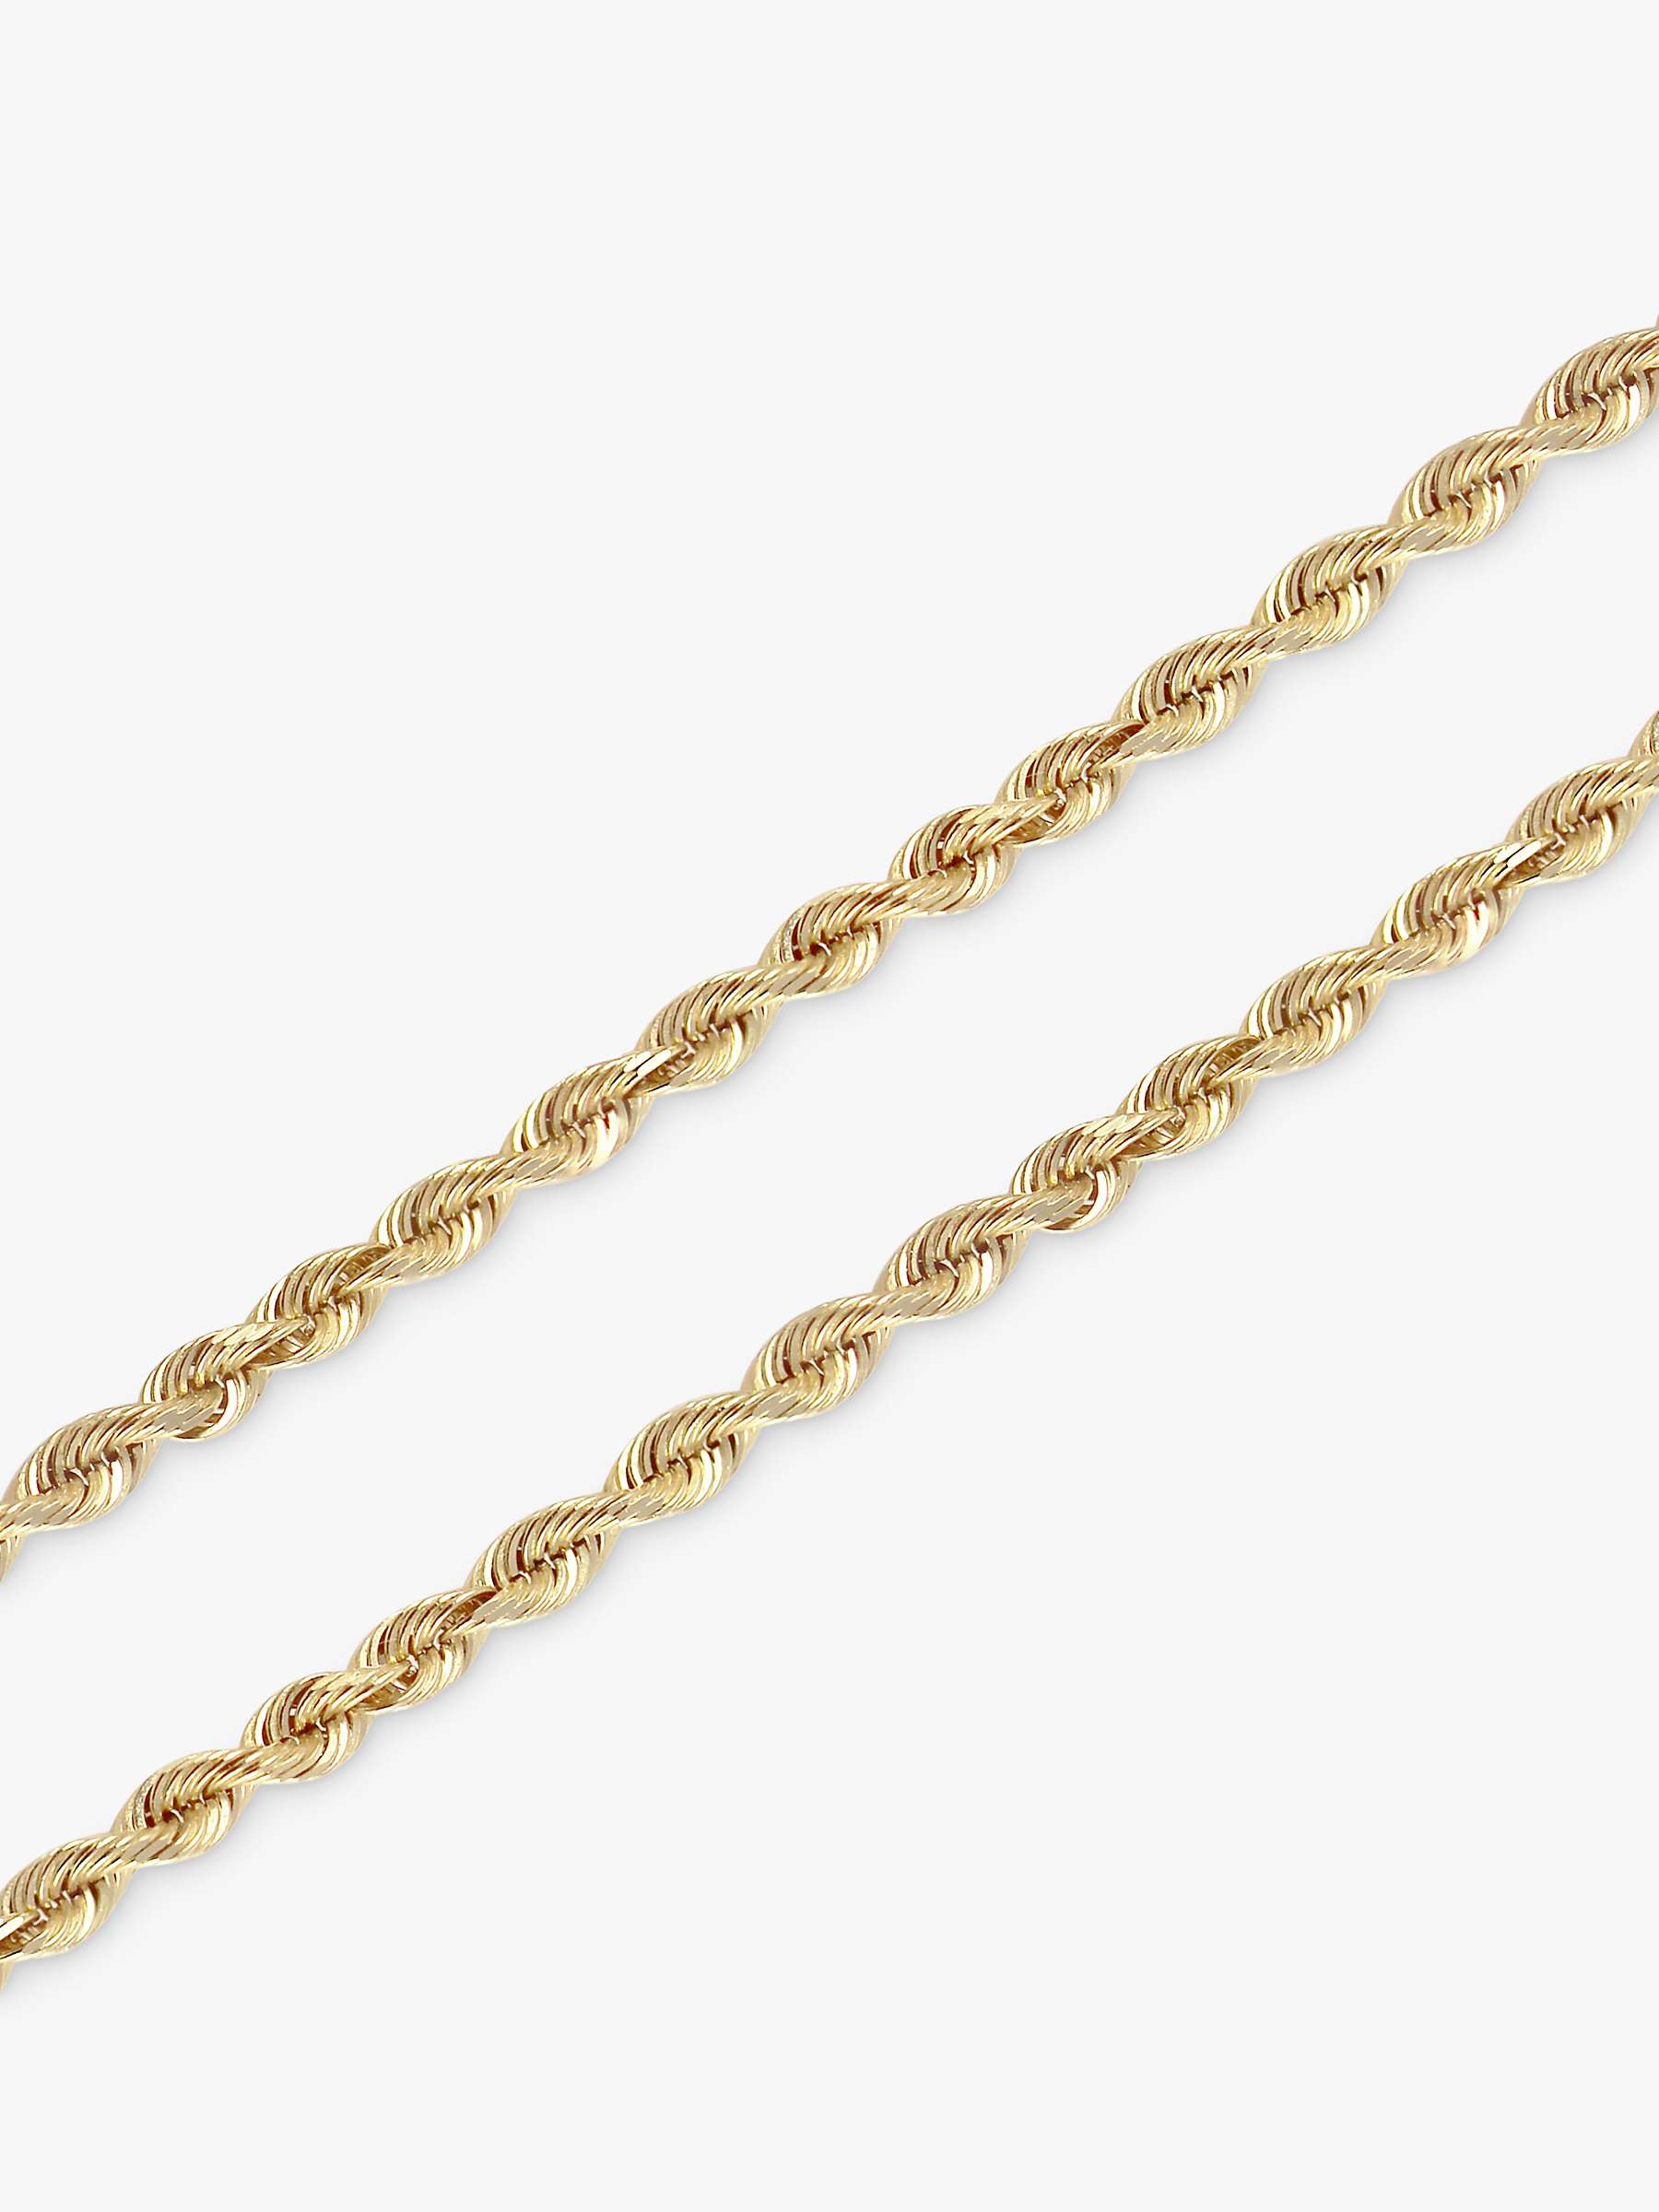 Buy Kojis 14ct Yellow Gold Second Hand Rope Chain Necklace Online at johnlewis.com